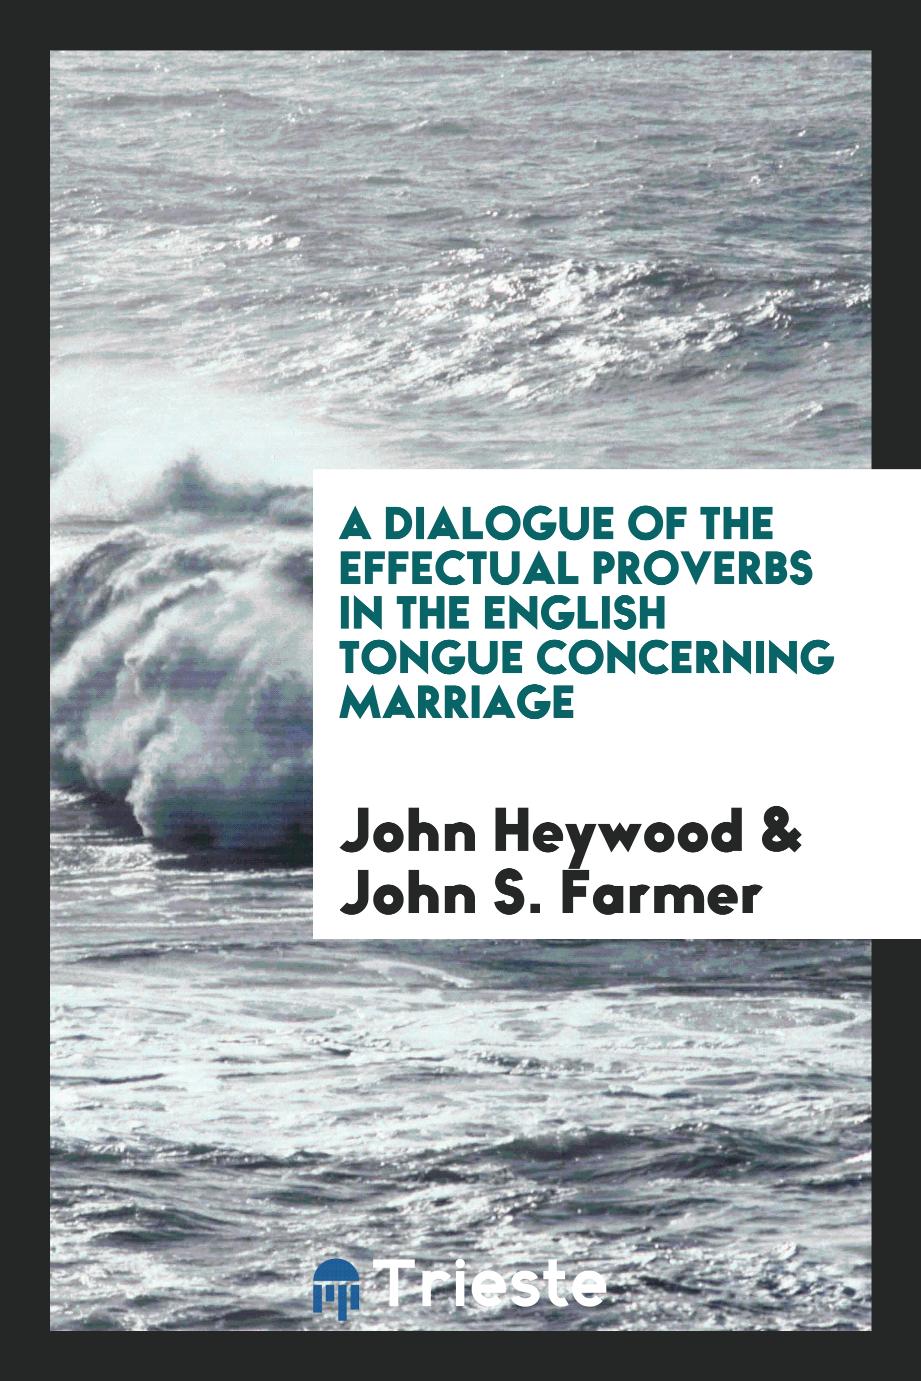 A dialogue of the effectual proverbs in the English tongue concerning marriage